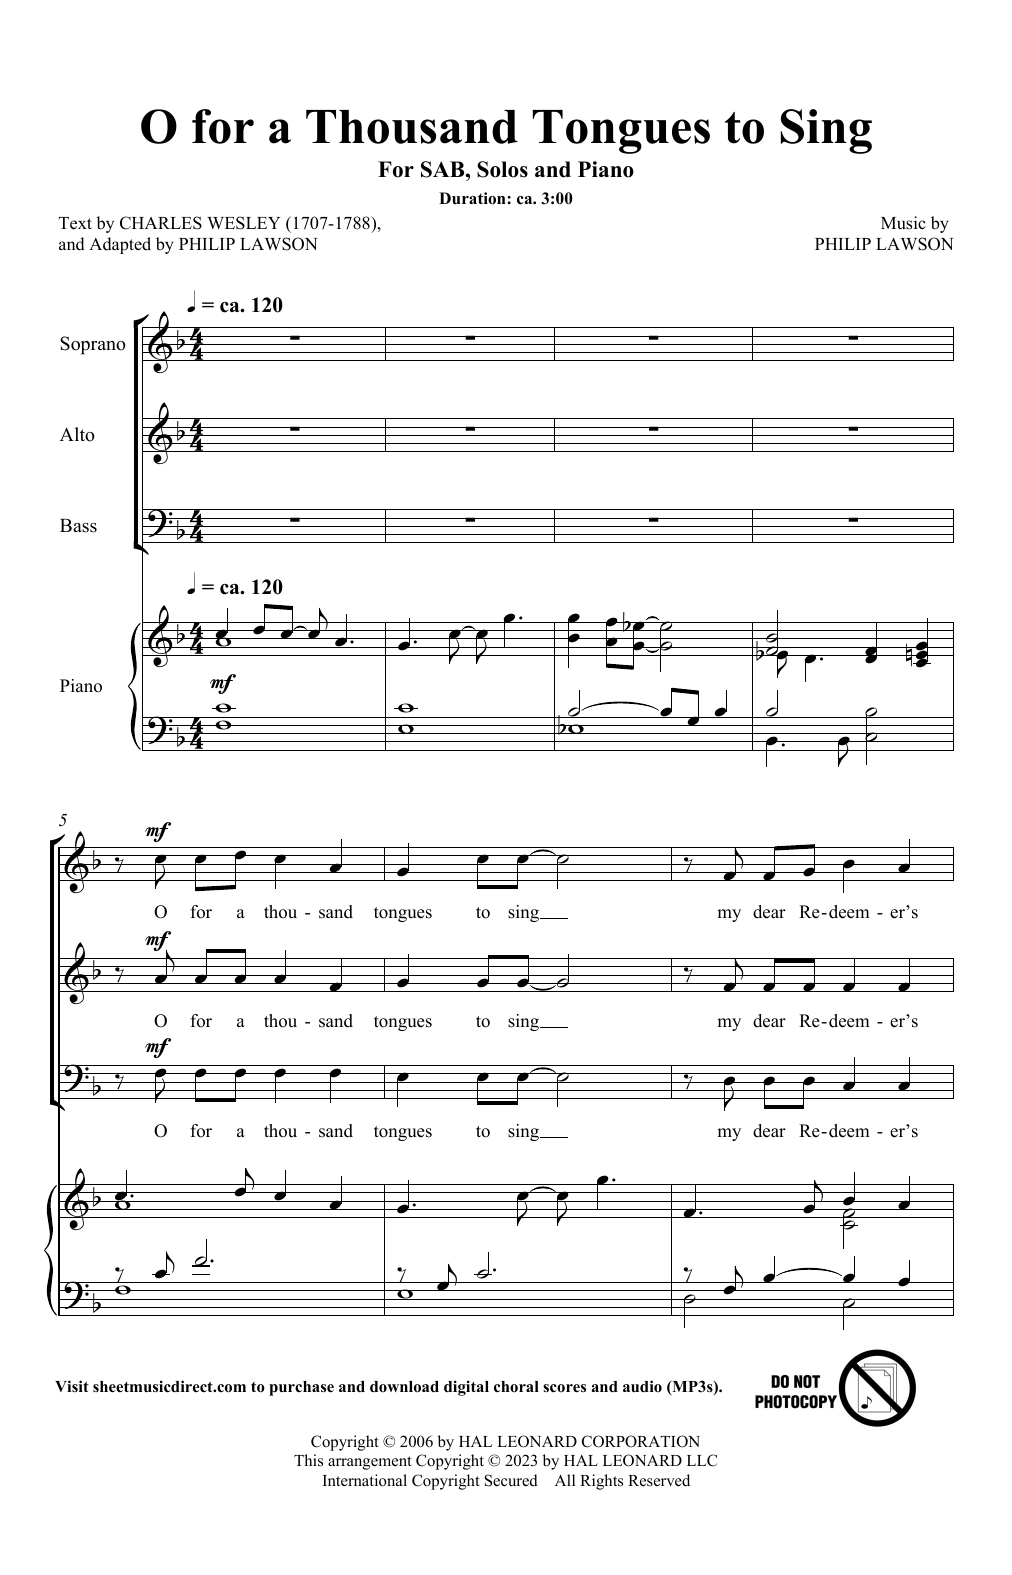 Download Philip Lawson O For A Thousand Tongues To Sing Sheet Music